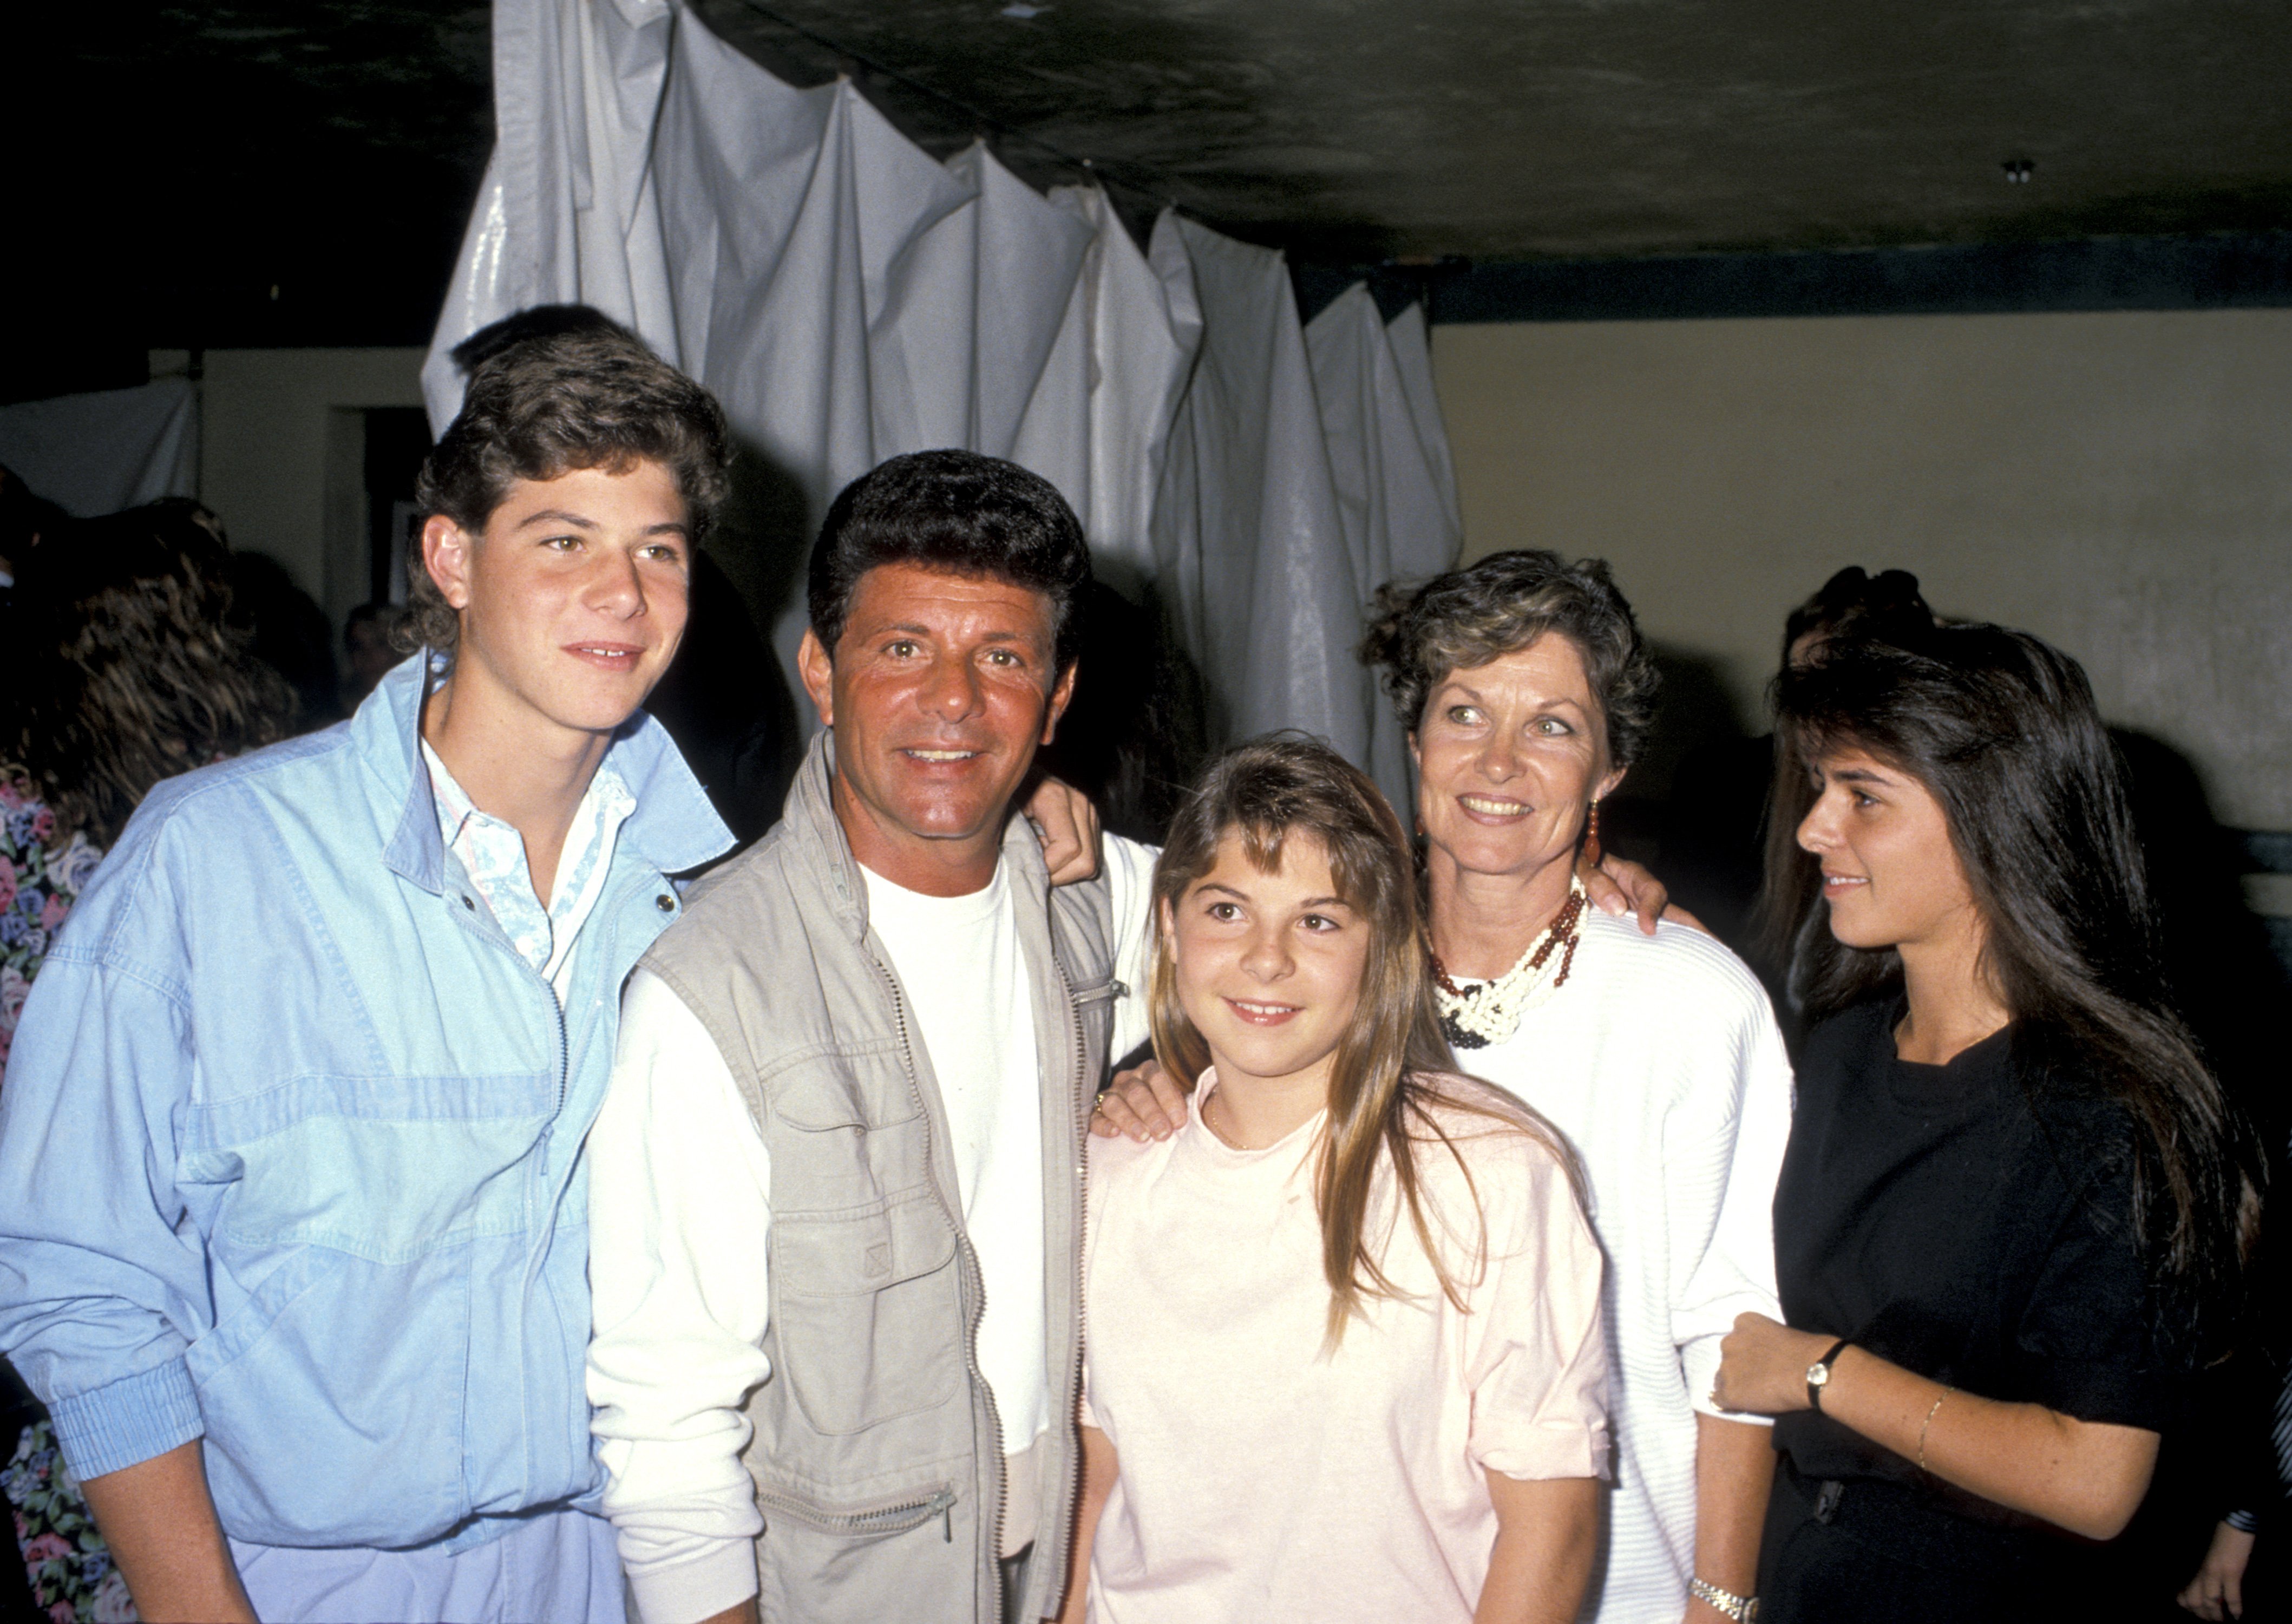 Frankie Avalon with his family during Starlight Foundation Benefit on September 22, 1988 at Ed Debevic's Restaurant in Beverly Hills, California, United States. | Source: Getty Images